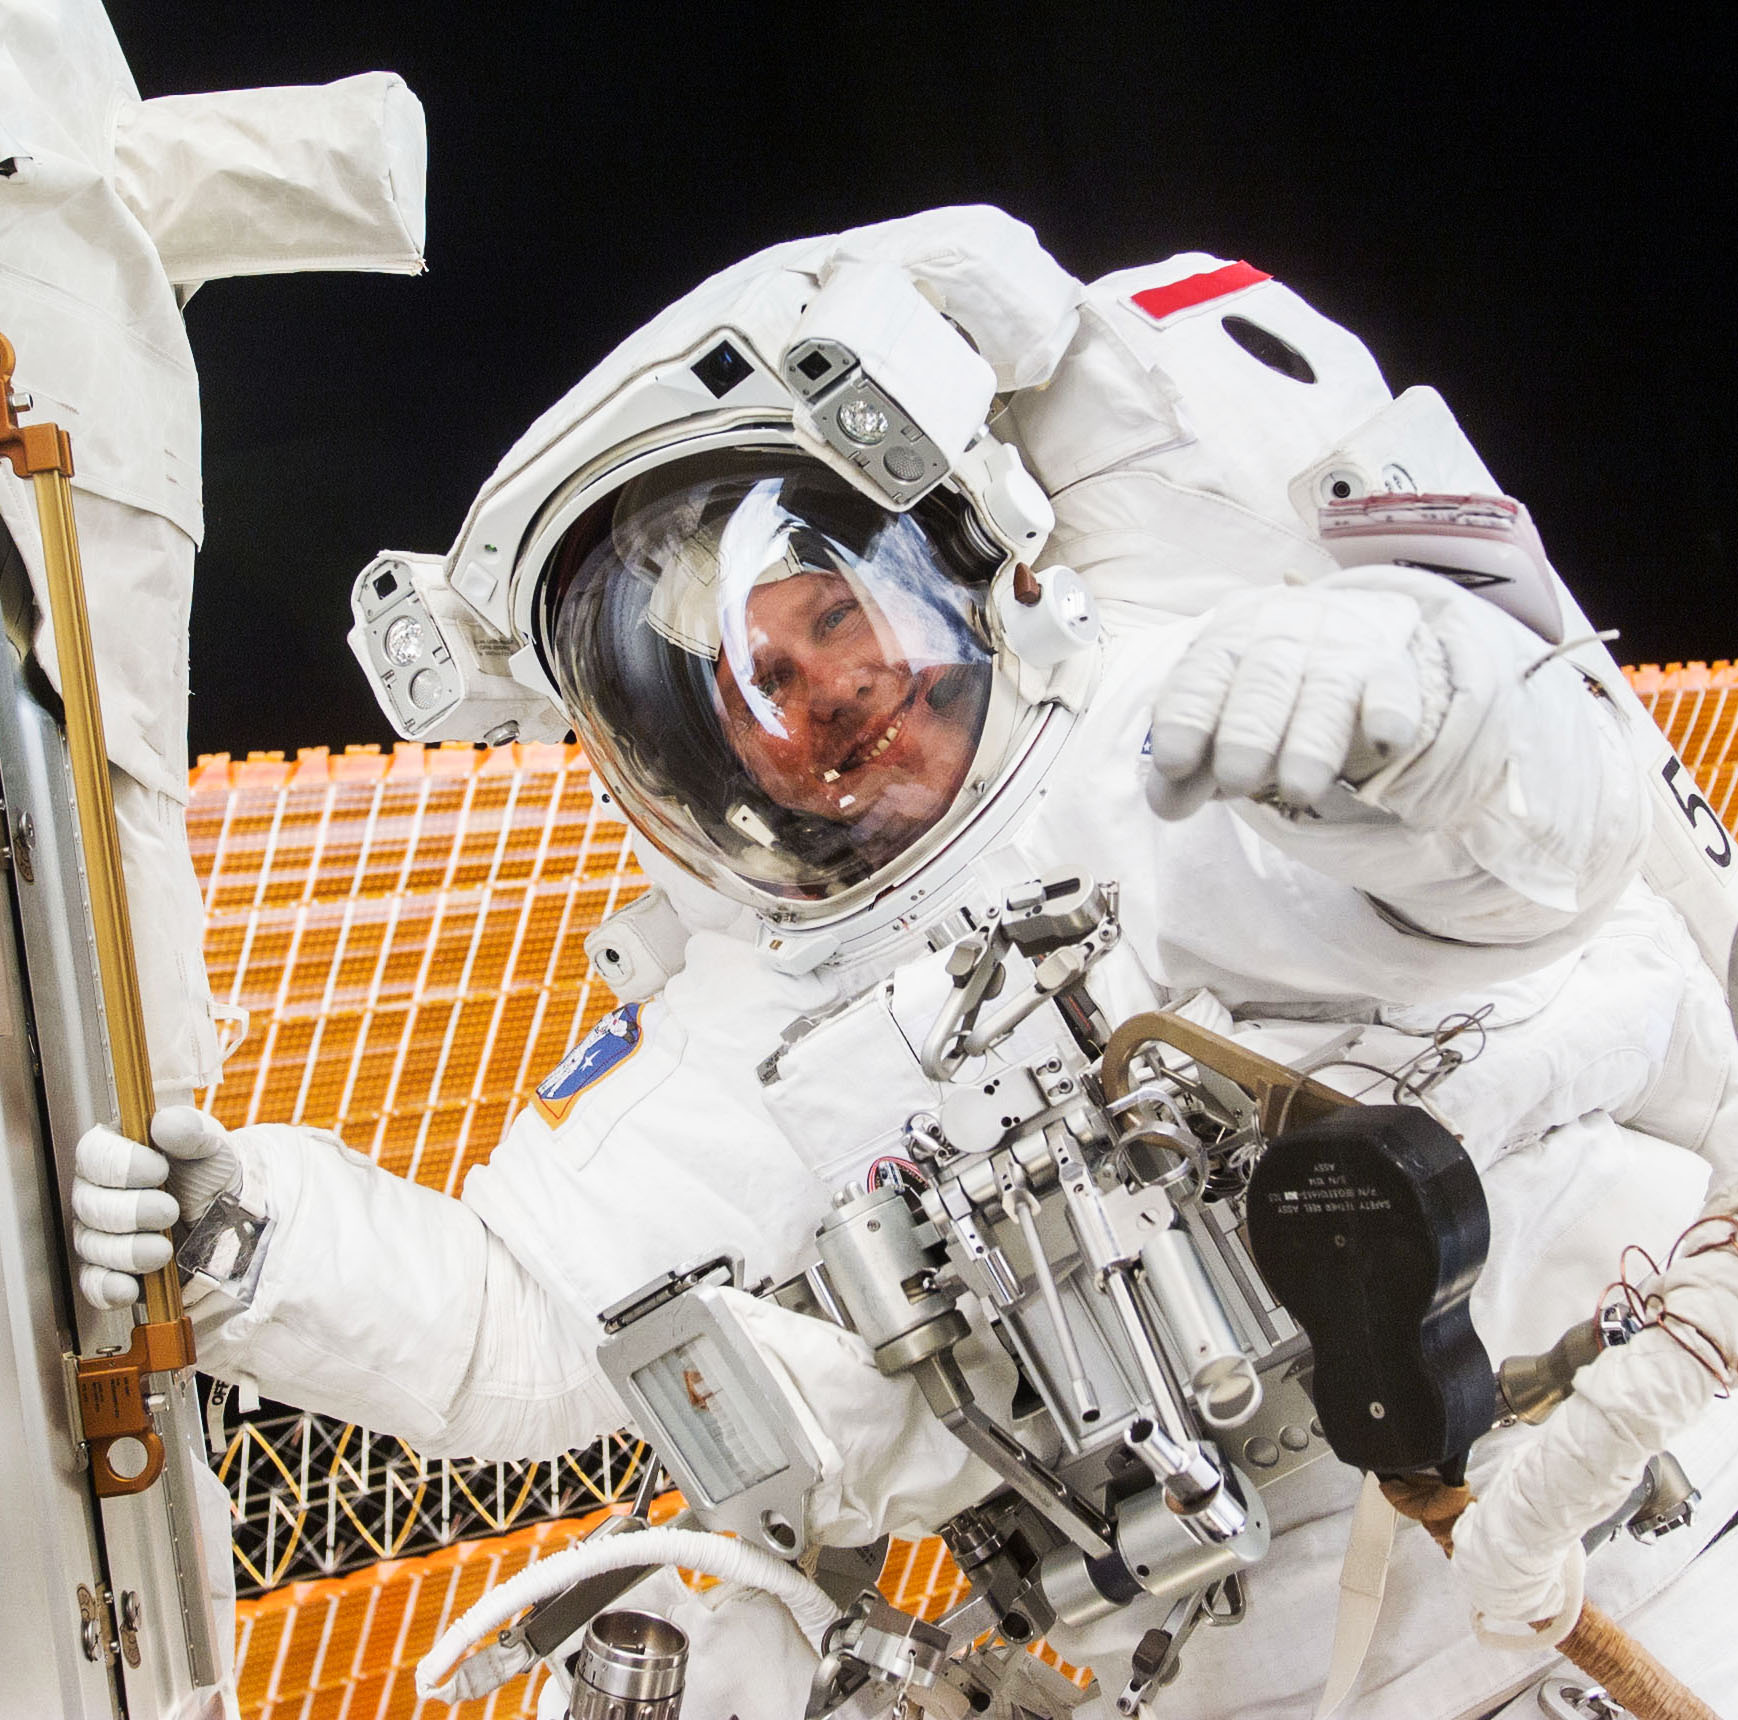 Tom Jones performs a spacewalk to work on the International Space Station during the STS-98 mission.